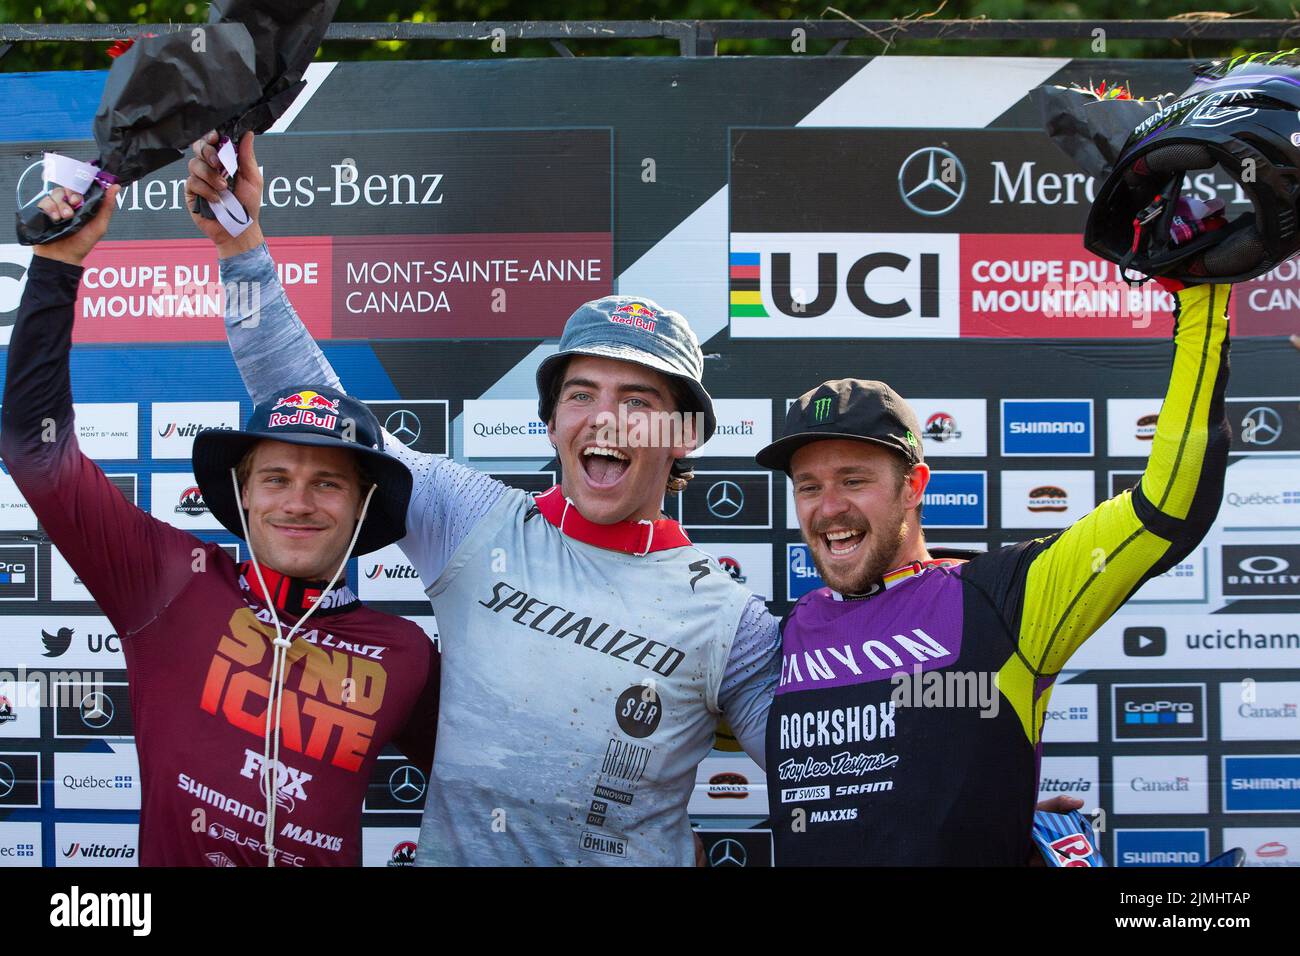 August 06, 2022: Finn Iles of Canada (3) (center) wins the World Cup MenÕs Downhill Final and celebrates with Laurie Greenland of Great Britain (left) and Troy Brosnan of Australia (right) during the 2022 Mercedes-Benz UCI Mountain Bike World Cup held at Mont-Sainte-Anne in Beaupre, Quebec, Canada. Daniel Lea/CSM Stock Photo